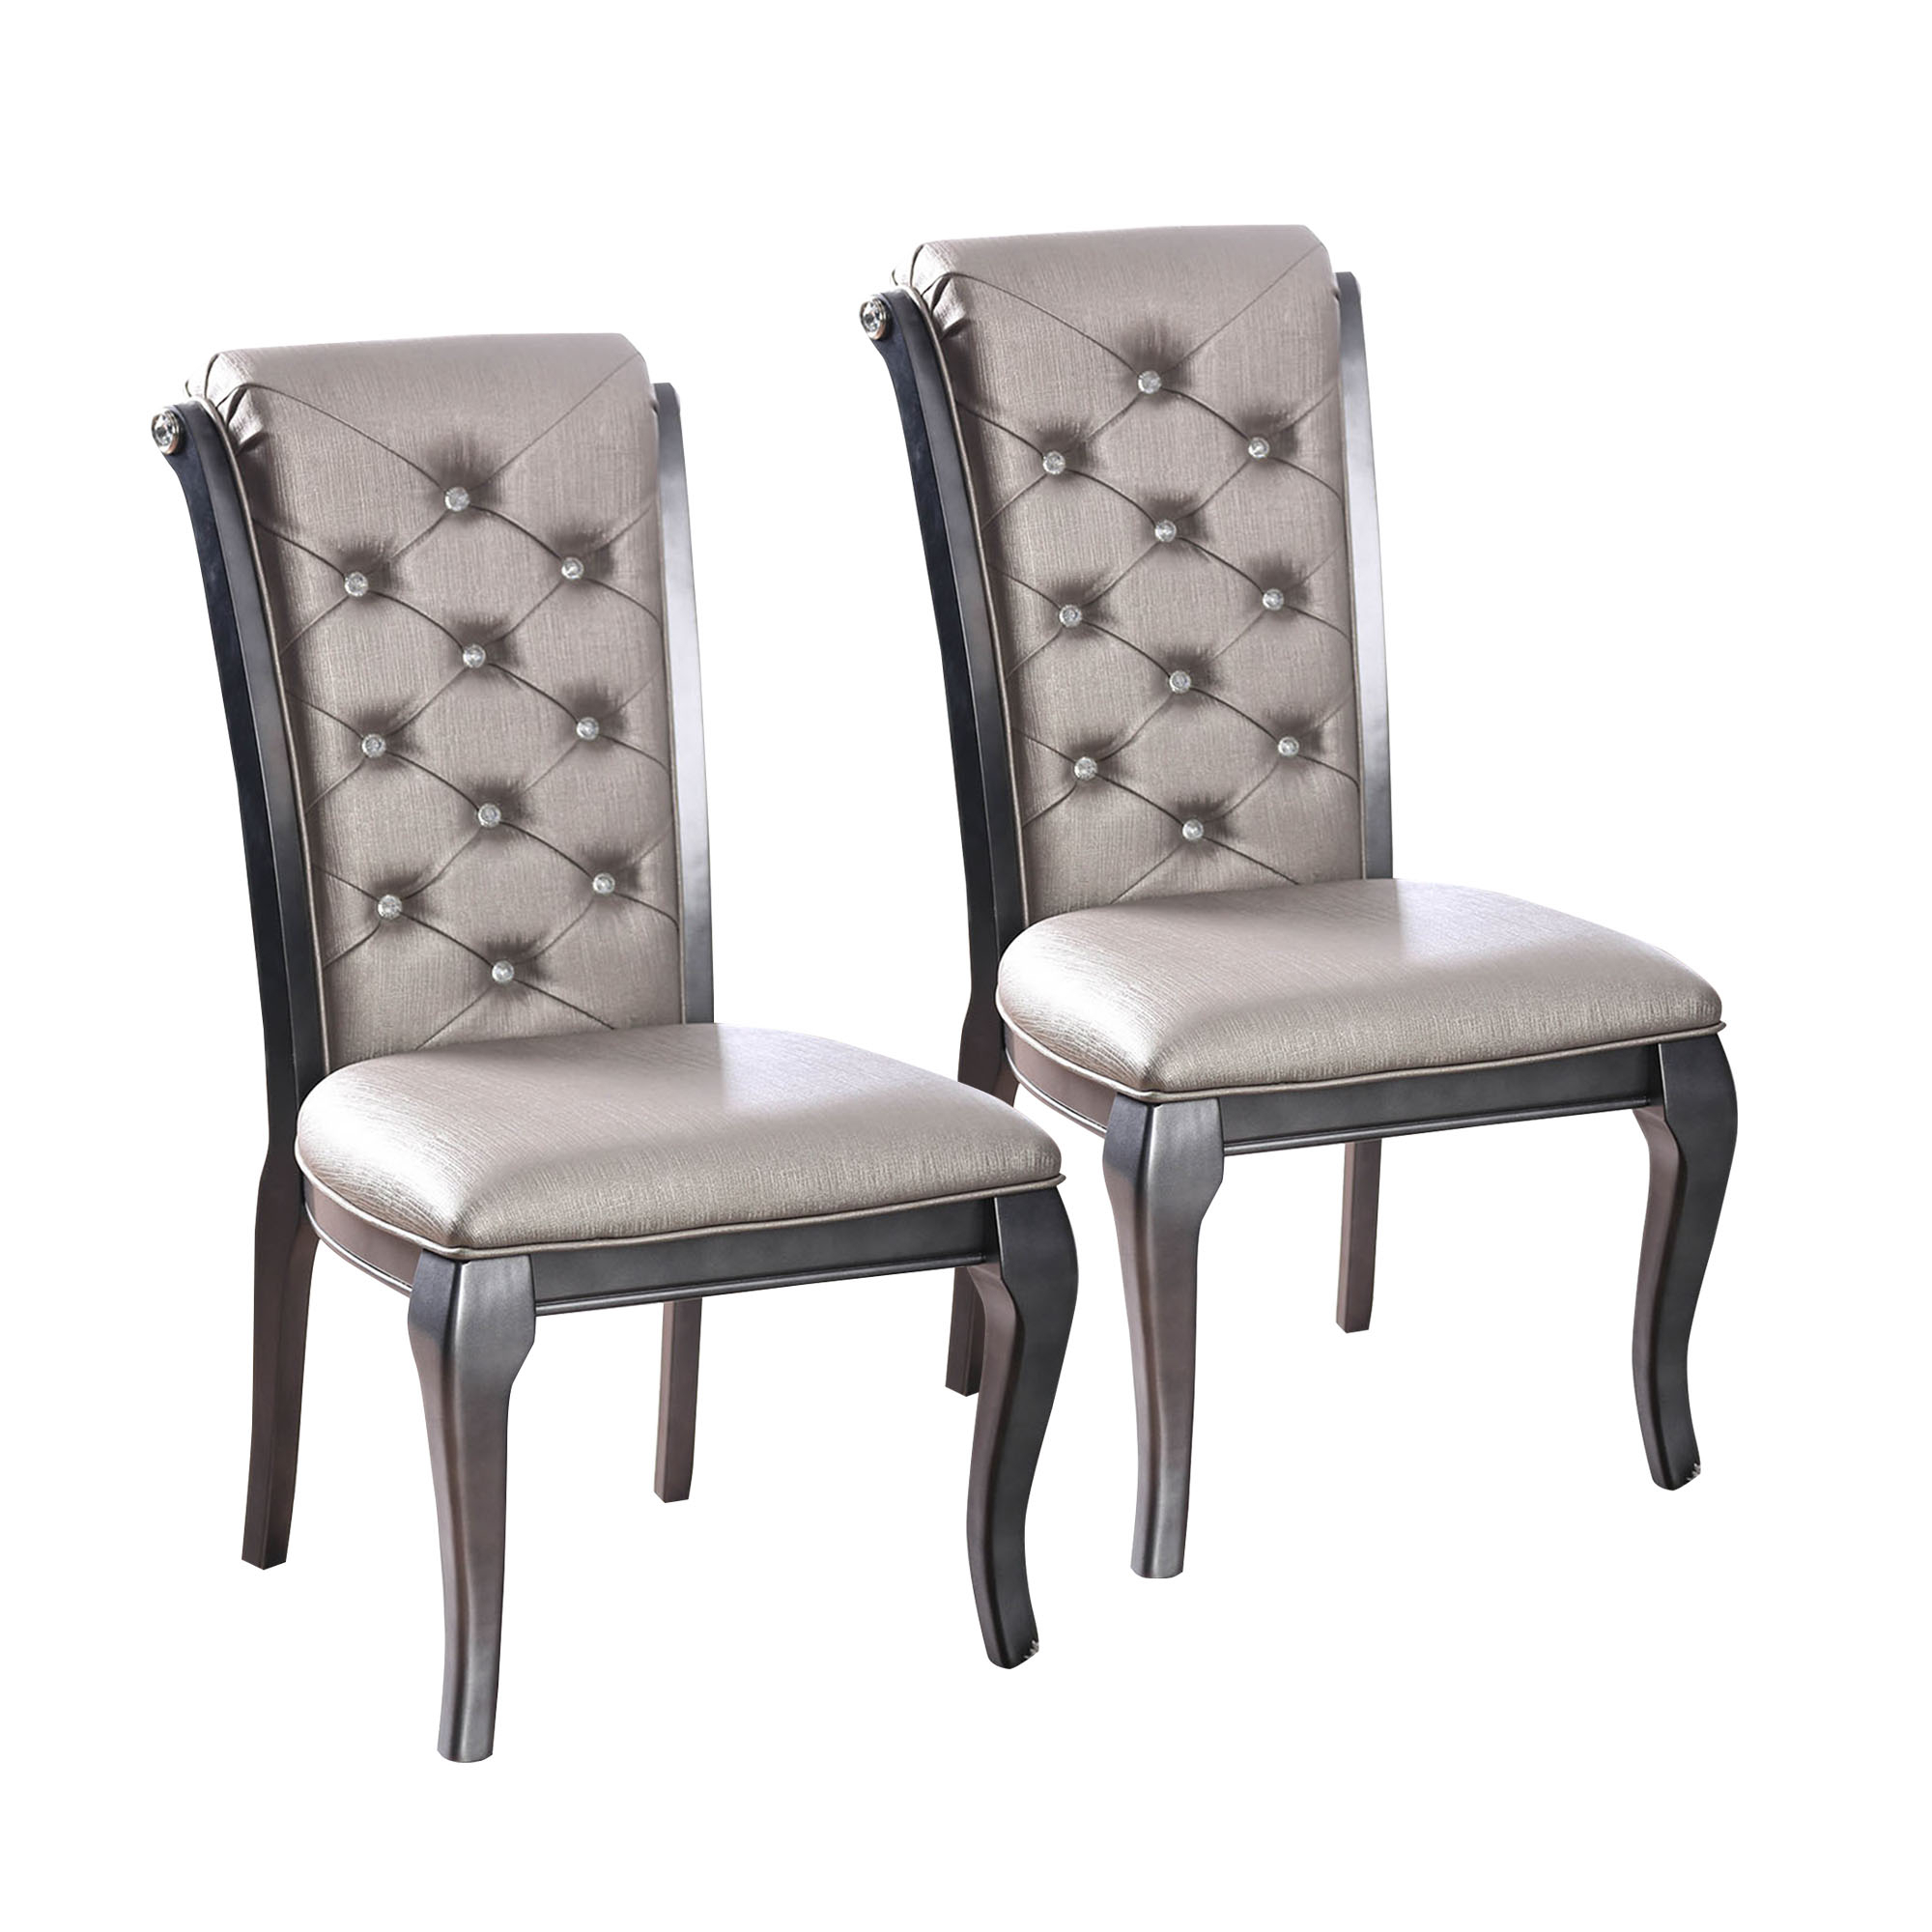 Button Tufted Leatherette Upholstered Wooden Side Chair With Scrolled Back, Pack Of Two, Gray - Saltoro Sherpi